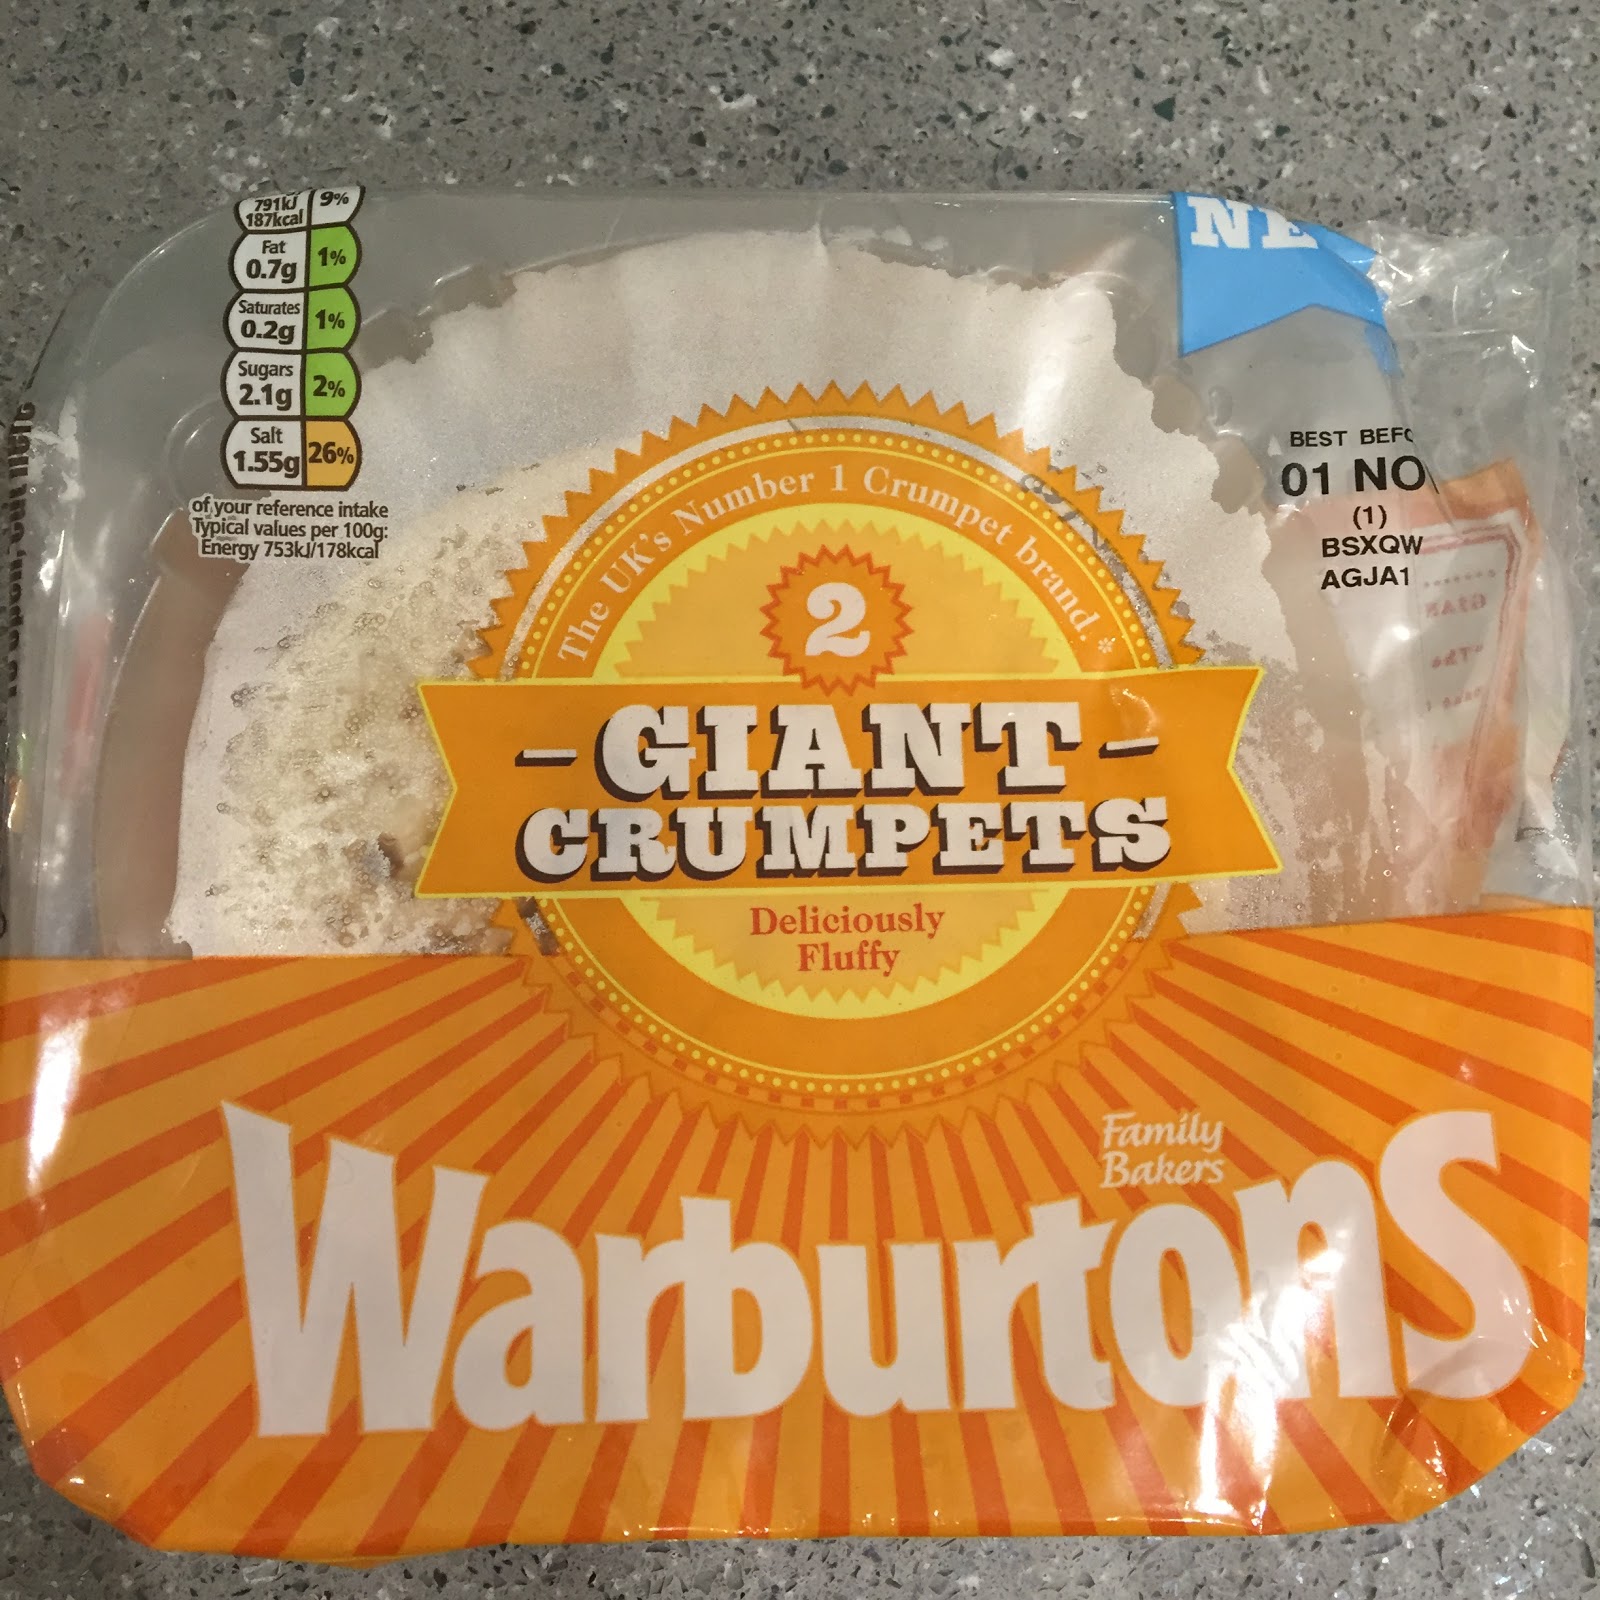 Archived Reviews From Amy Seeks New Treats: New Warburtons Giant Crumpets